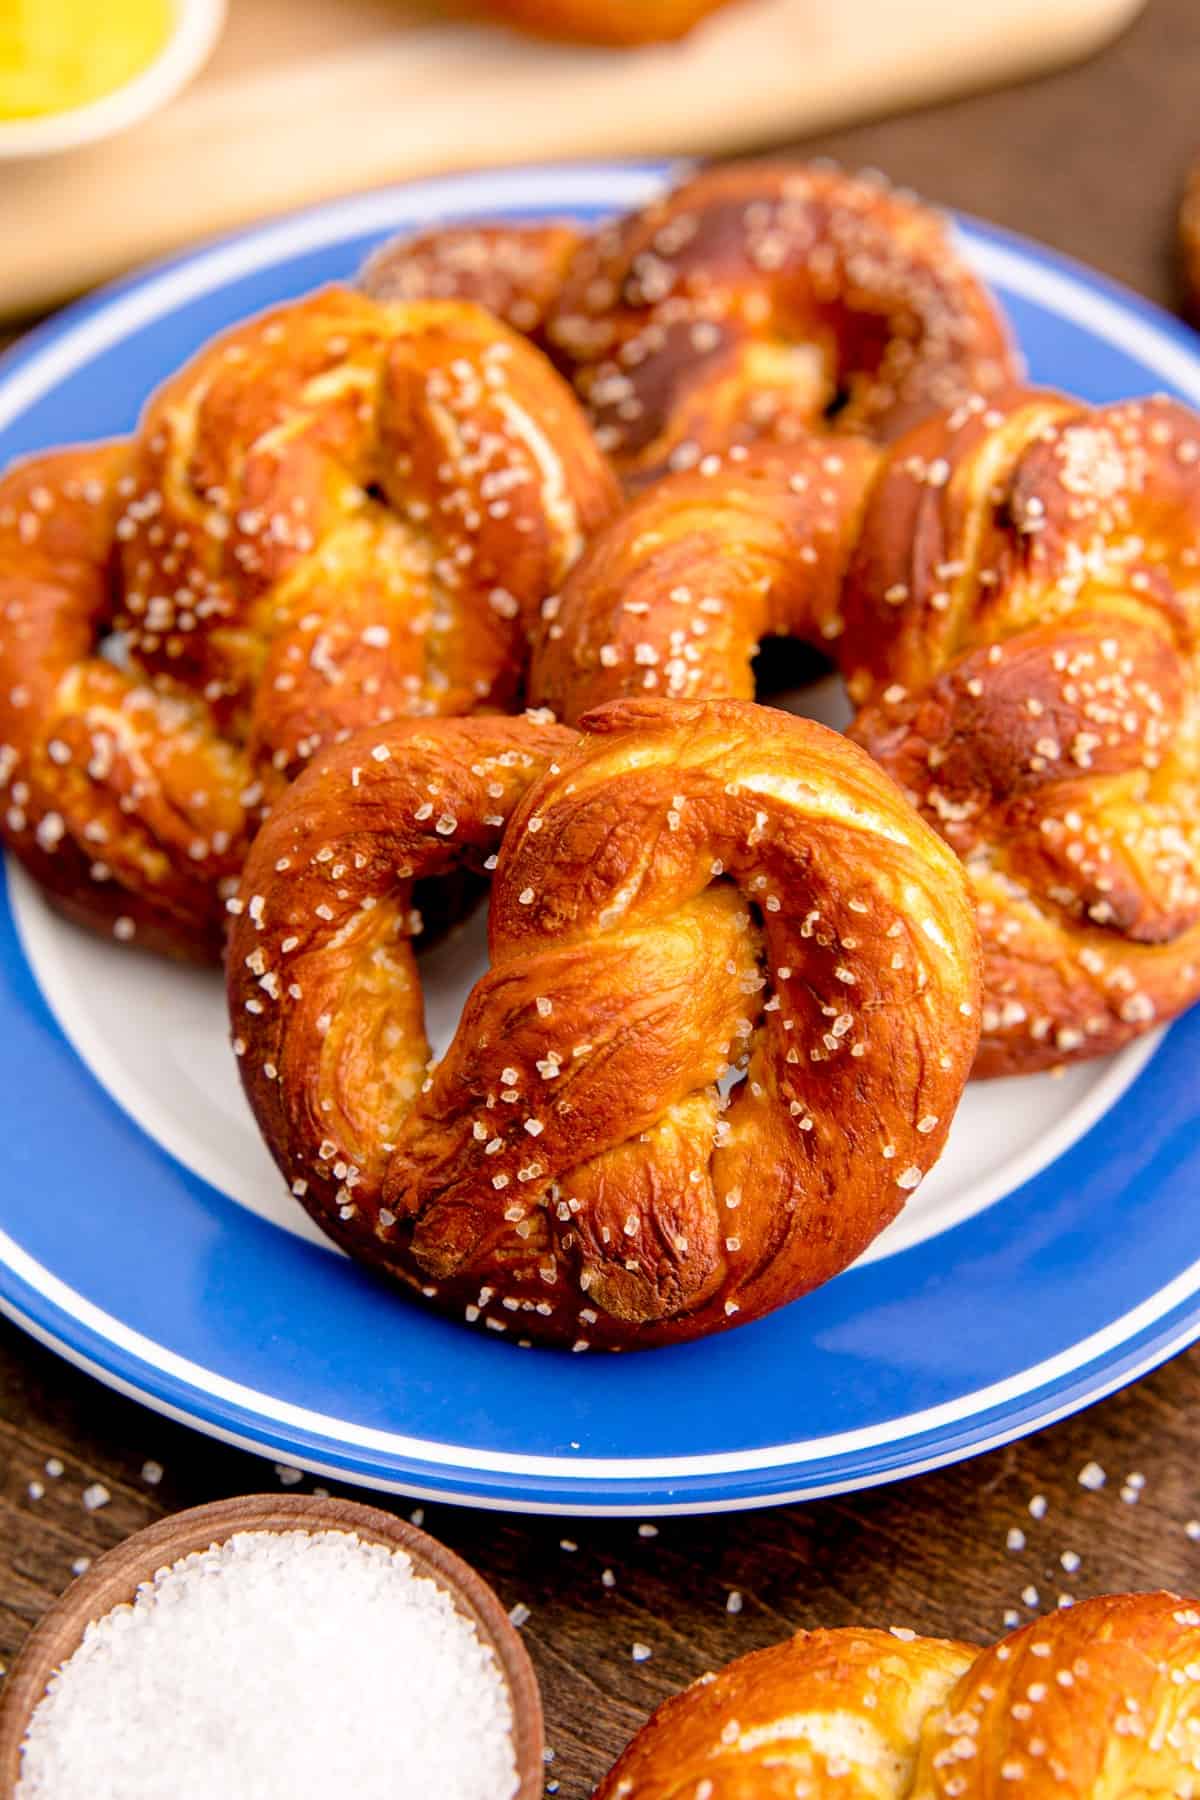 Soft pretzels on a blue and white plate